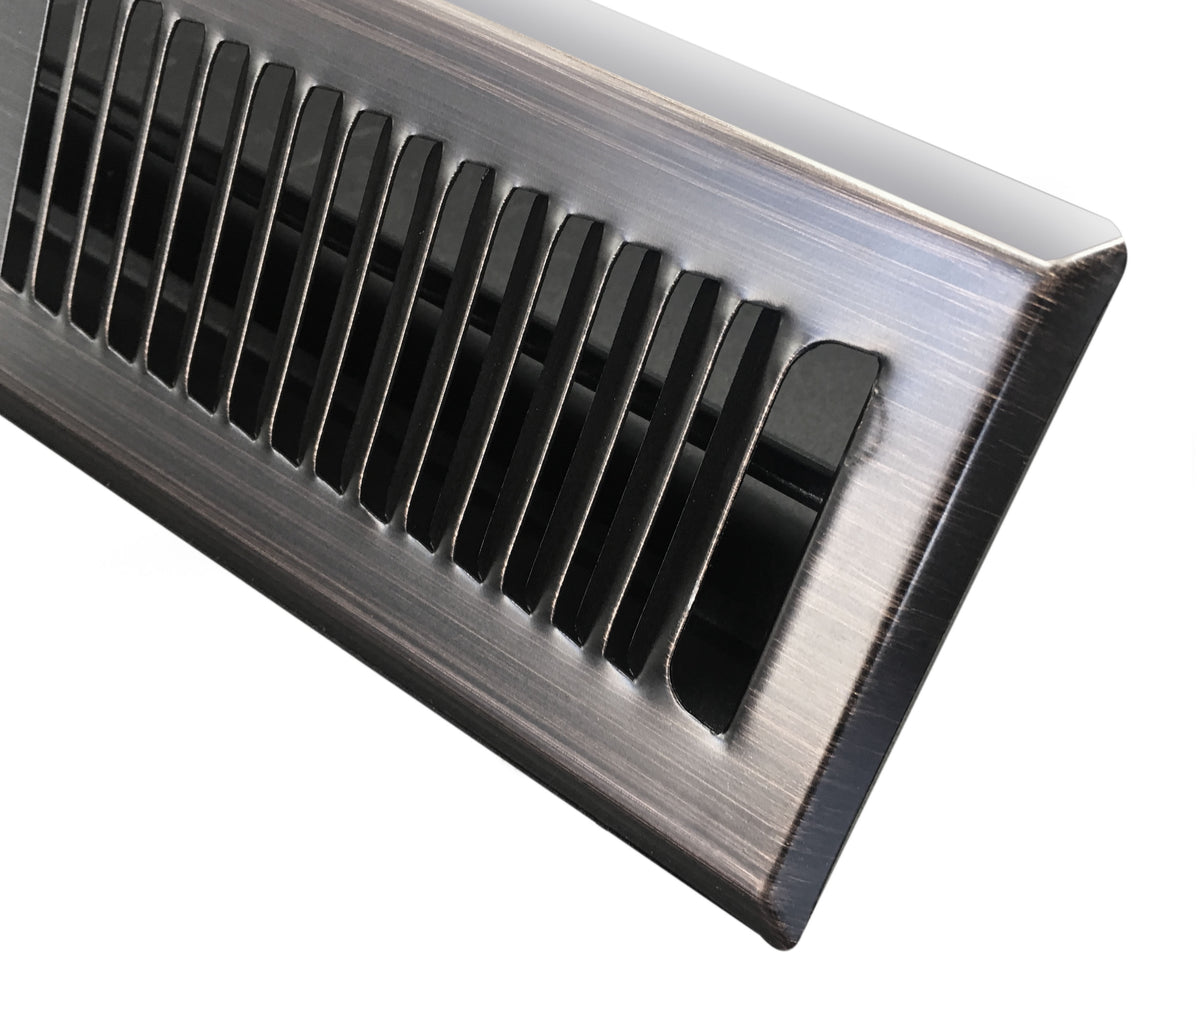 2&quot; X 10&quot; Modern Floor Register Grille With Dampers - Contempo Slotted Decorative Grate - HVAC Vent Duct Cover - Matte Black